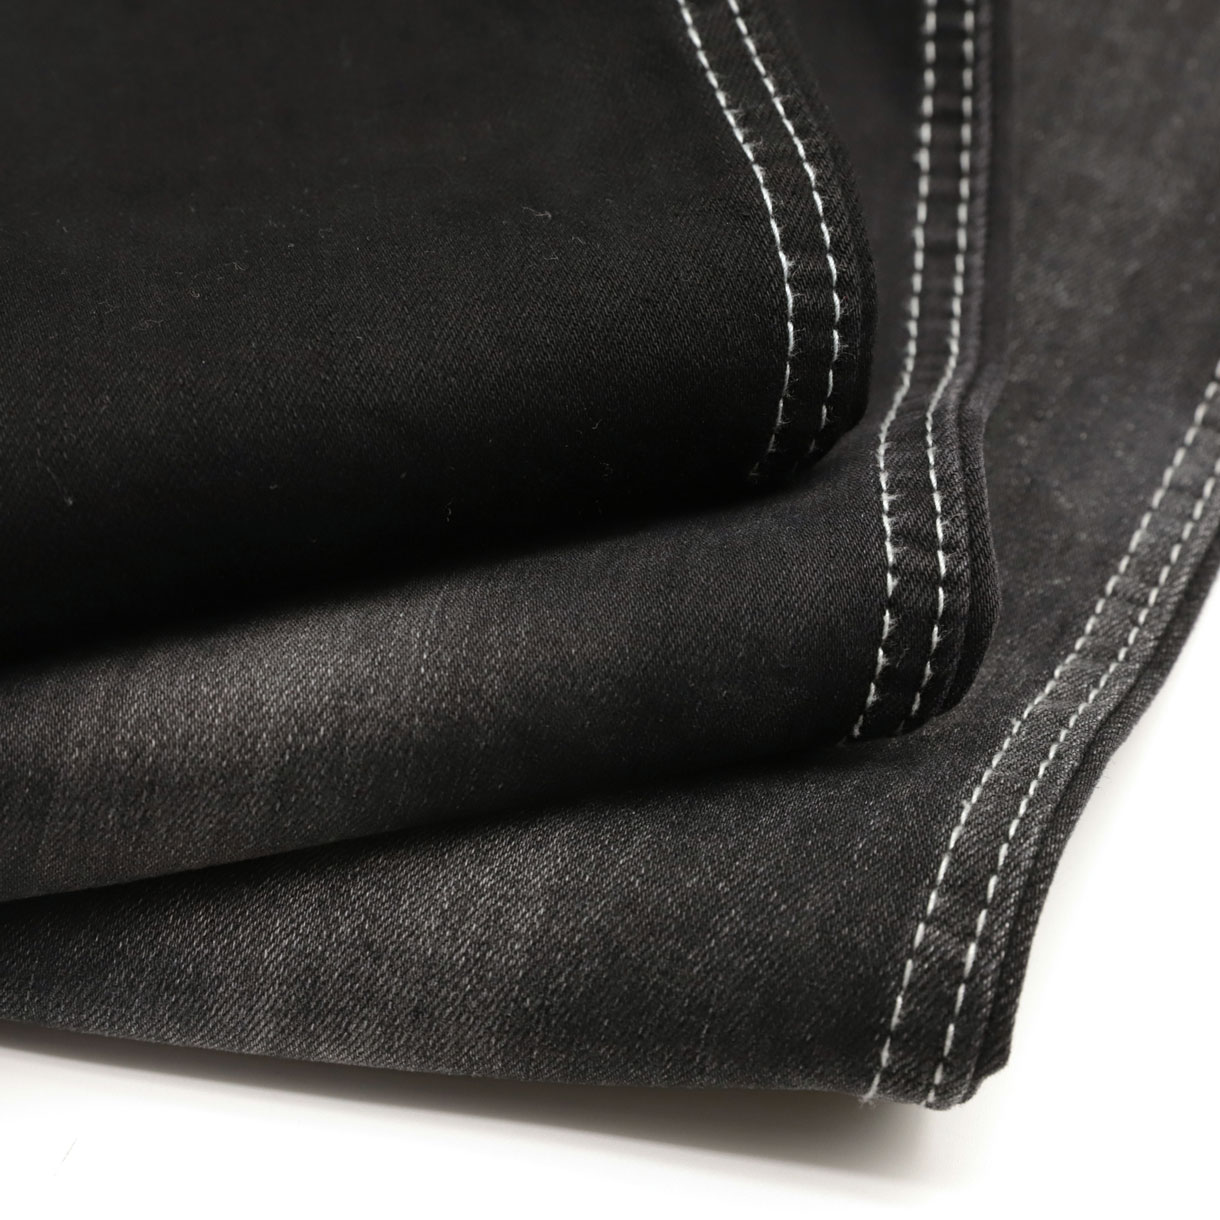 A Simple Way to Have the Best Super Stretch Denim Fabric Options 1